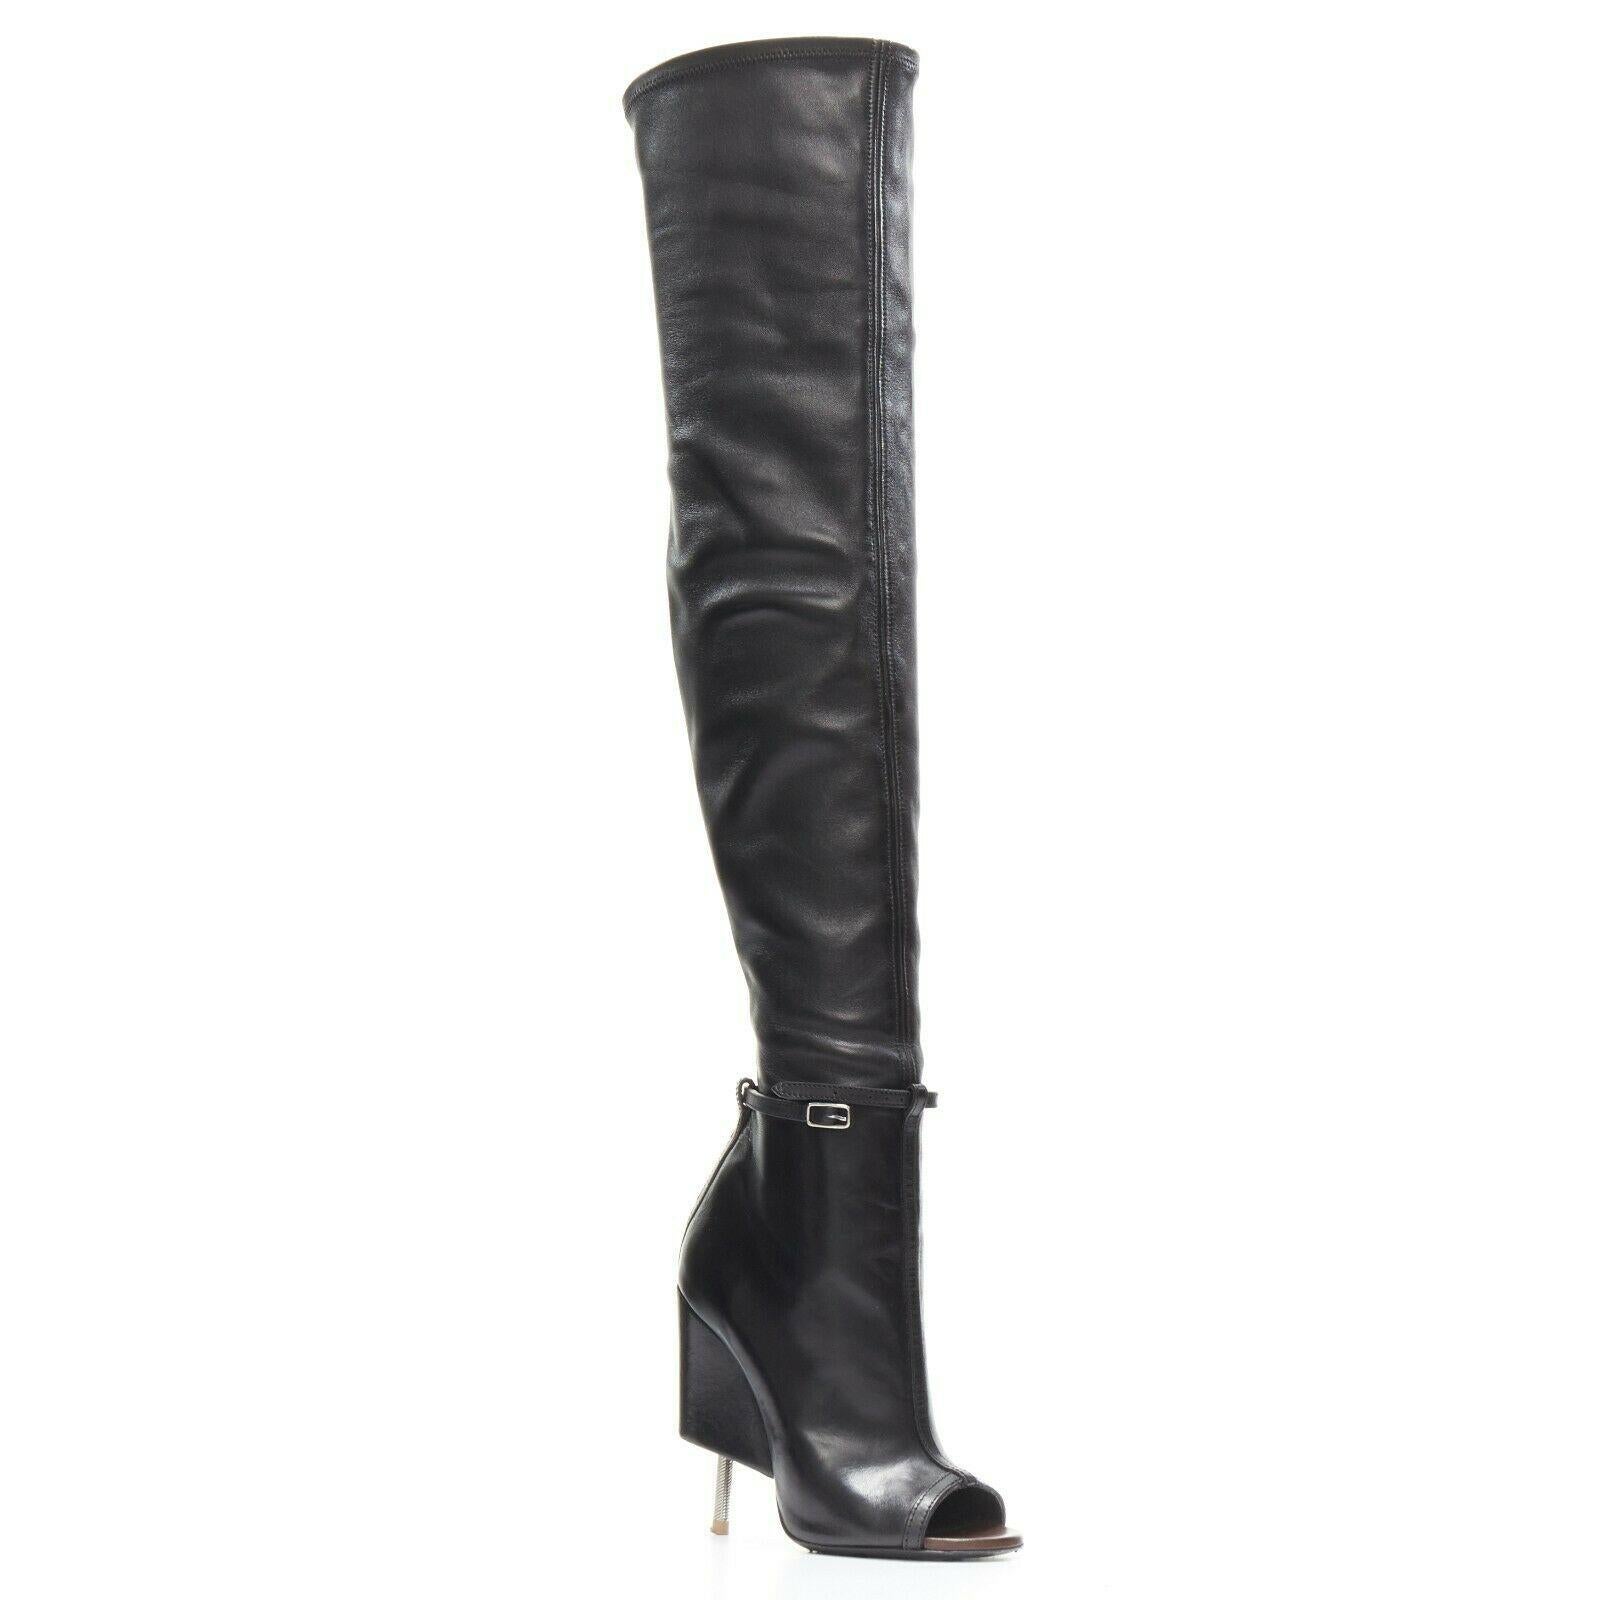 GIVENCHY RICCARDO TISCI Narlia black leather thigh high boots wedge heel FR37
Designer: GIVENCHY BY RICCARDO TISCI
Model / Season: Spring / Summer 2015, Narlia
Material: Lambskin leather
Color: black
Pattern: plain
Description: Thigh high boots. 3/4